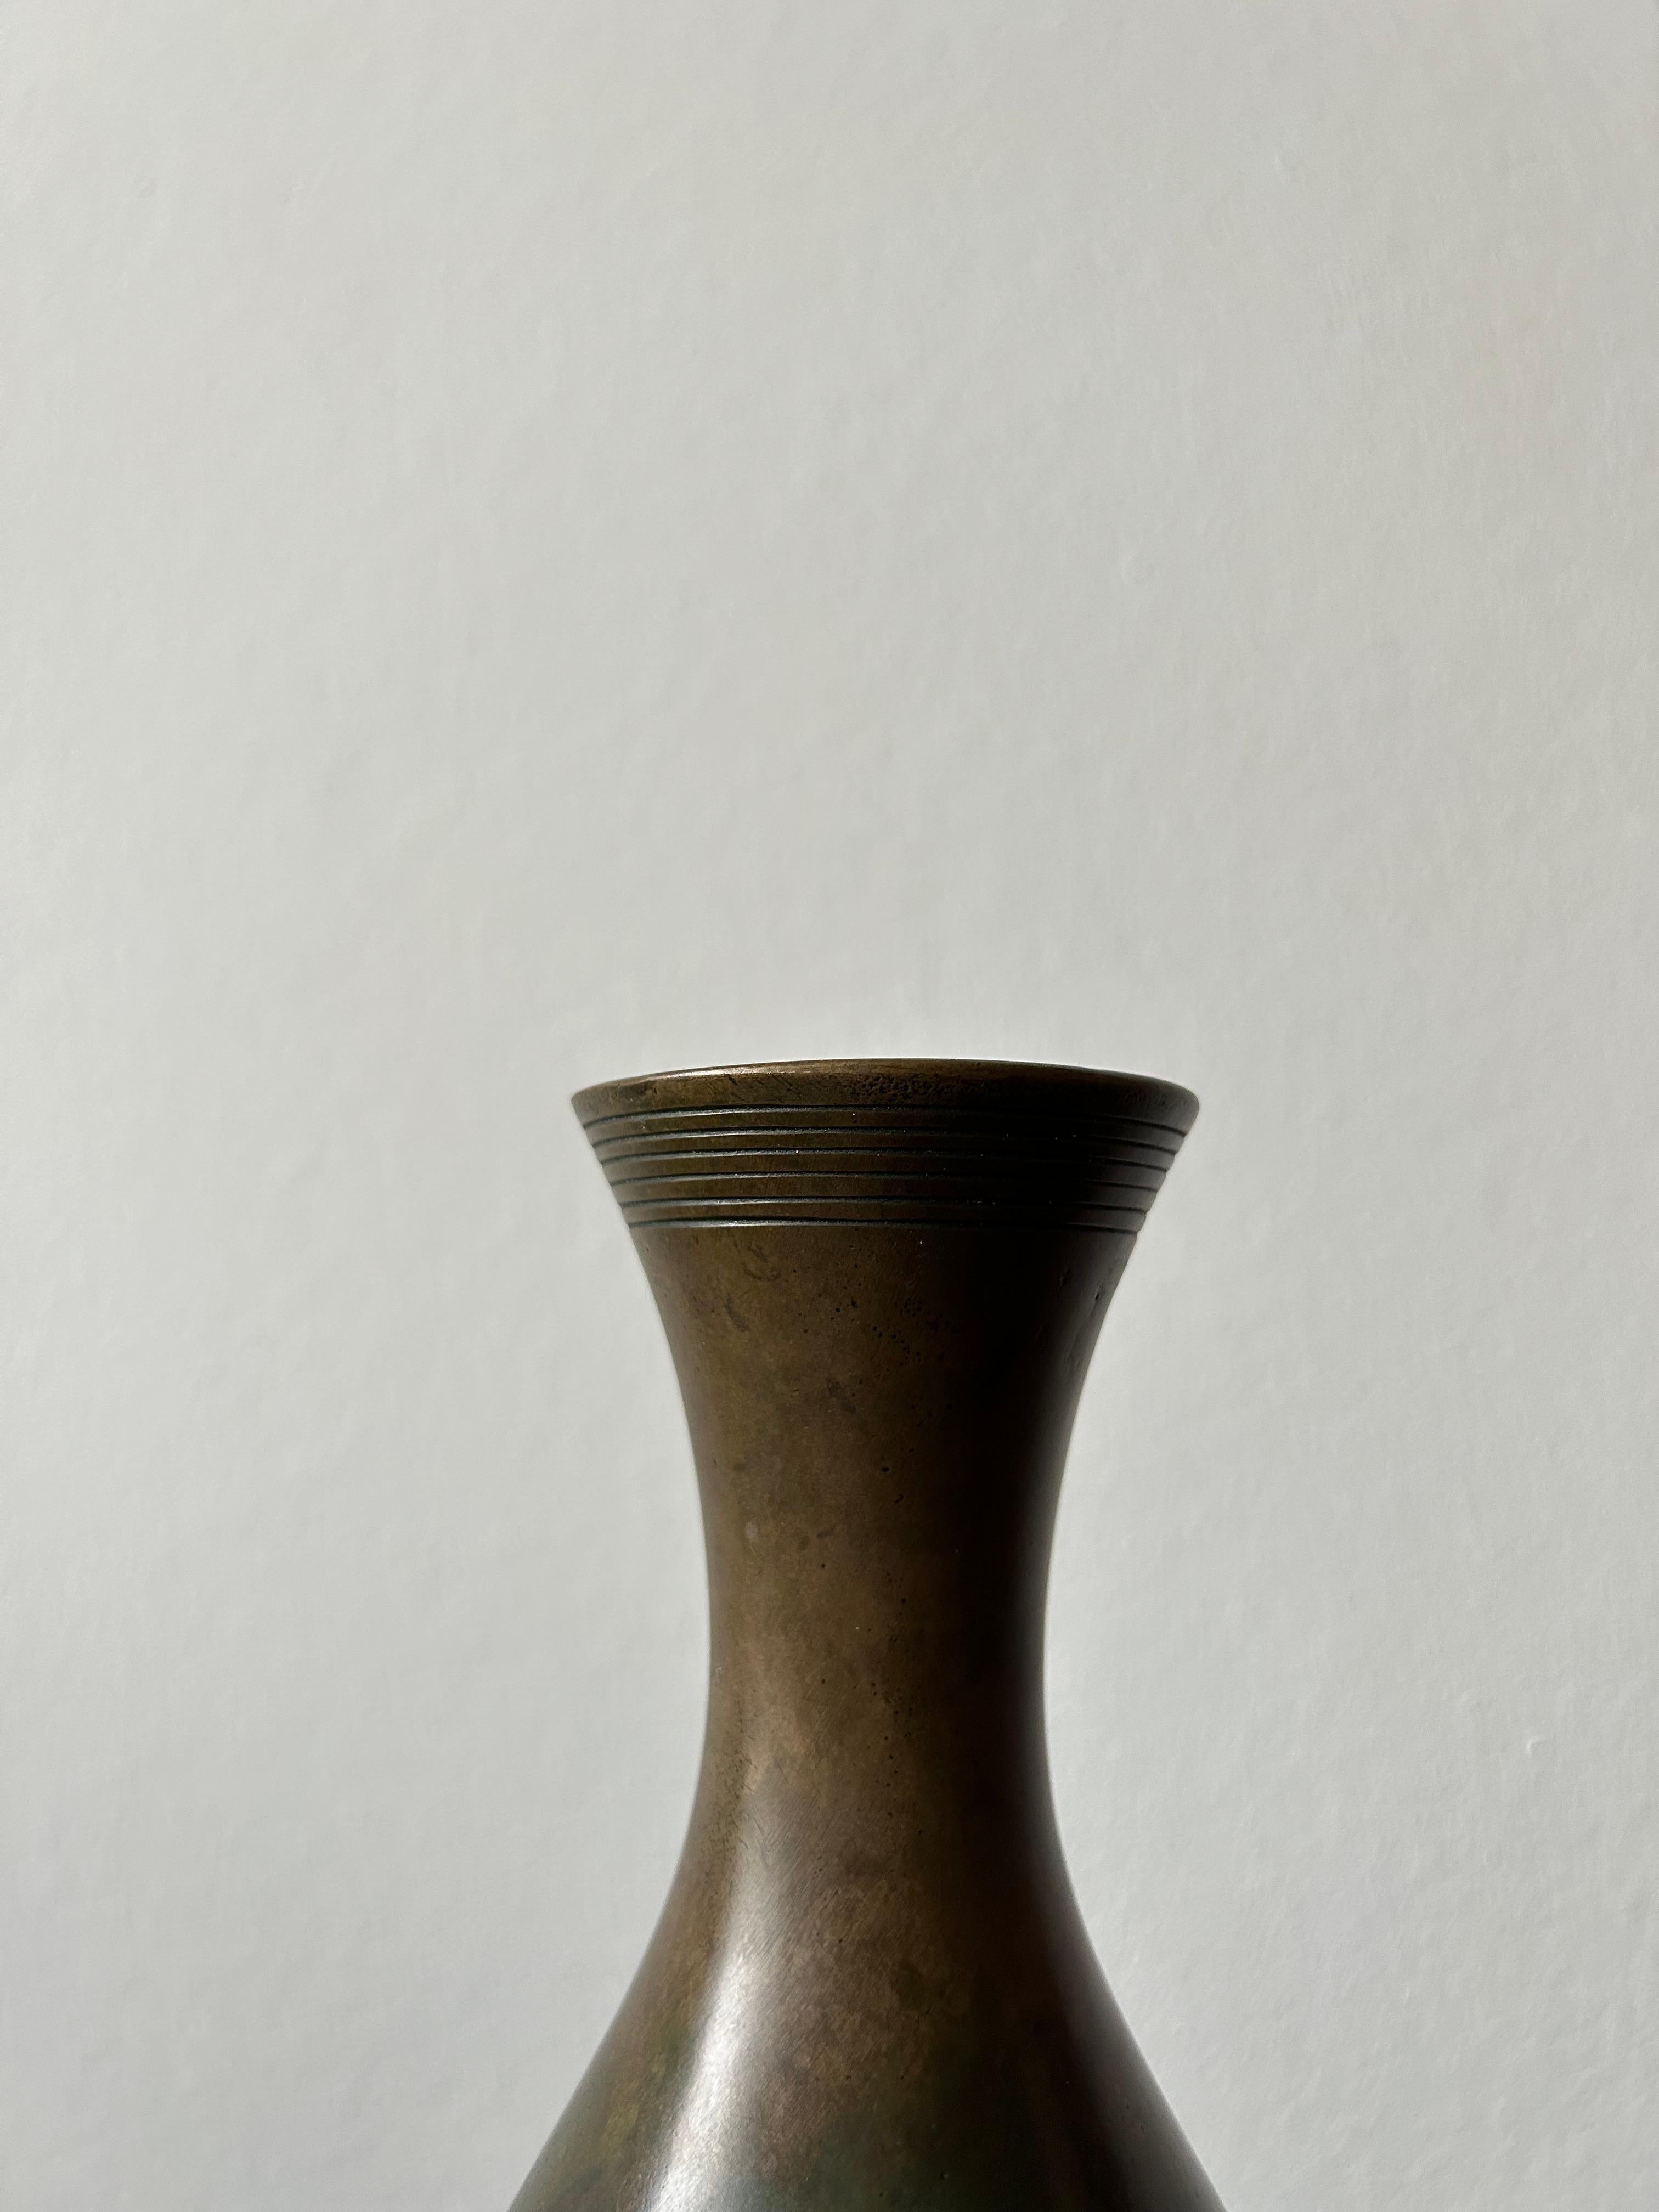 Patinaed bronze vase designed by Just Andersen and manufactured by GAB in Sweden in the 1920s. 

Just Andersen (born 13 July 1884 in Godhavn, Greenland, died 11 December 1943 in Glostrup) was a Danish corpus artist, silversmith and sculptor and,